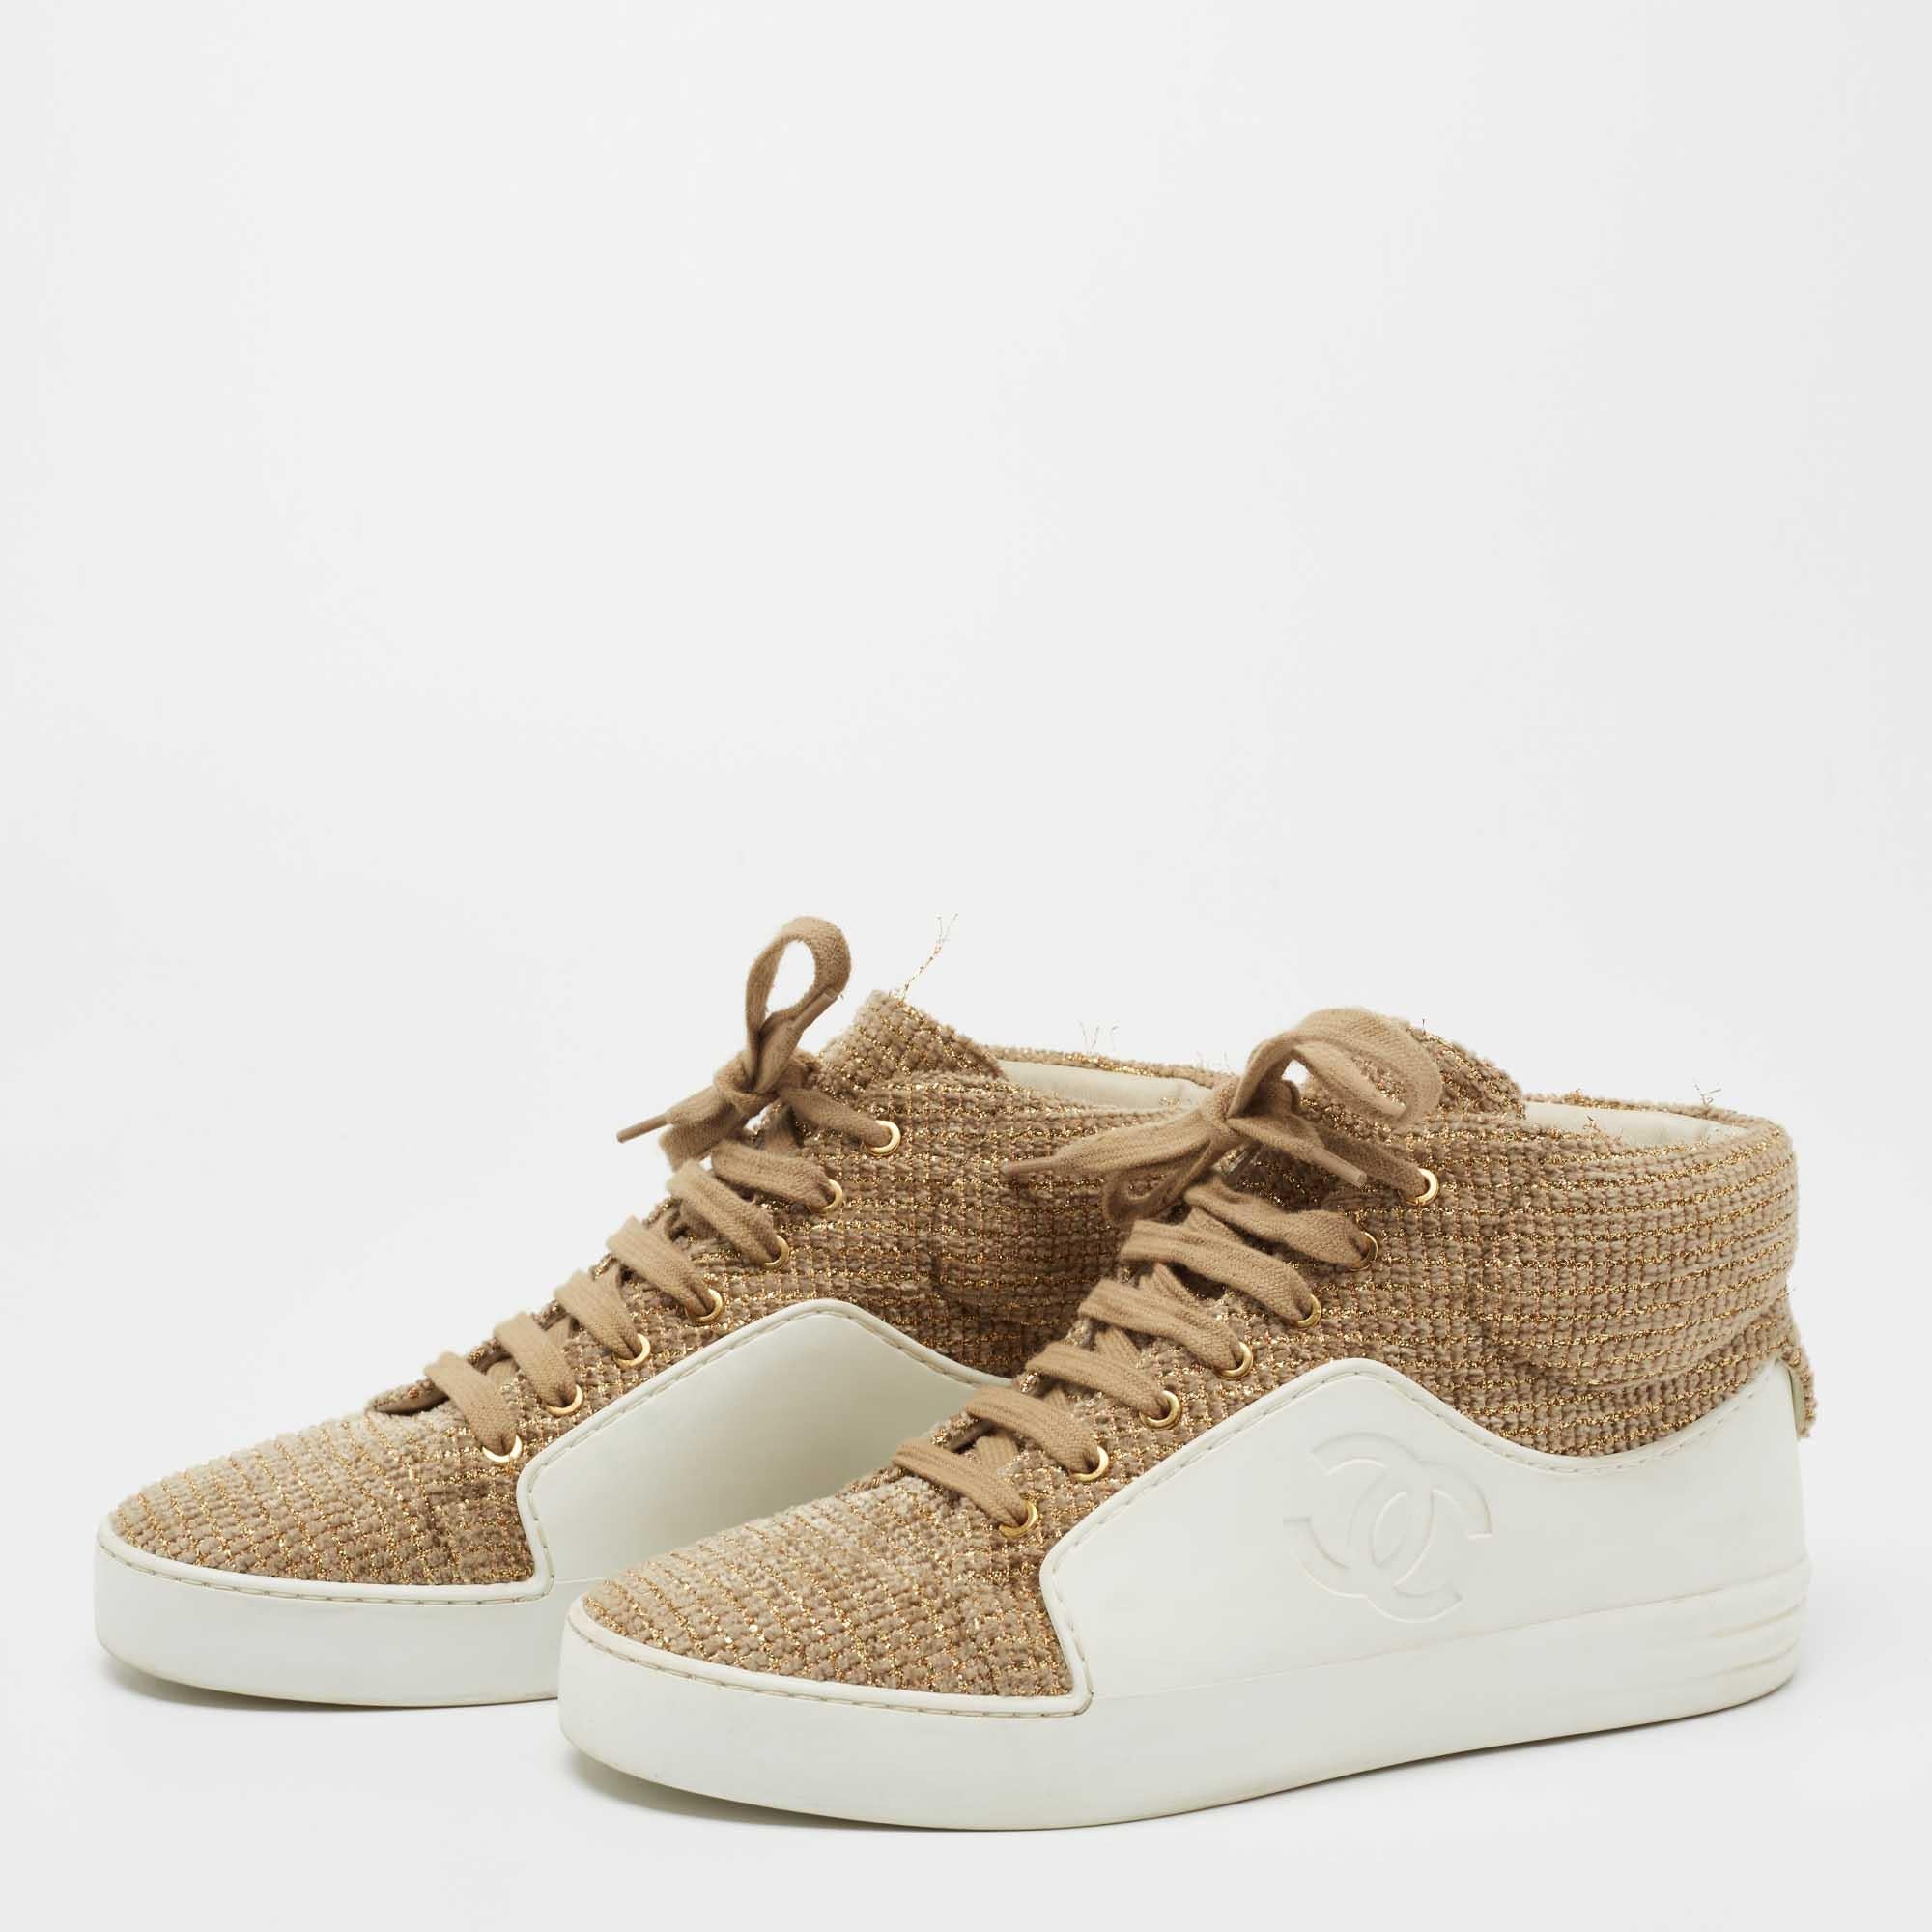 These designer sneakers represent the idea of comfortable fashion. They are crafted from high-quality materials and designed with nothing but style. A perfect fit for all casual occasions, these sneakers will spruce up any look effortlessly.

